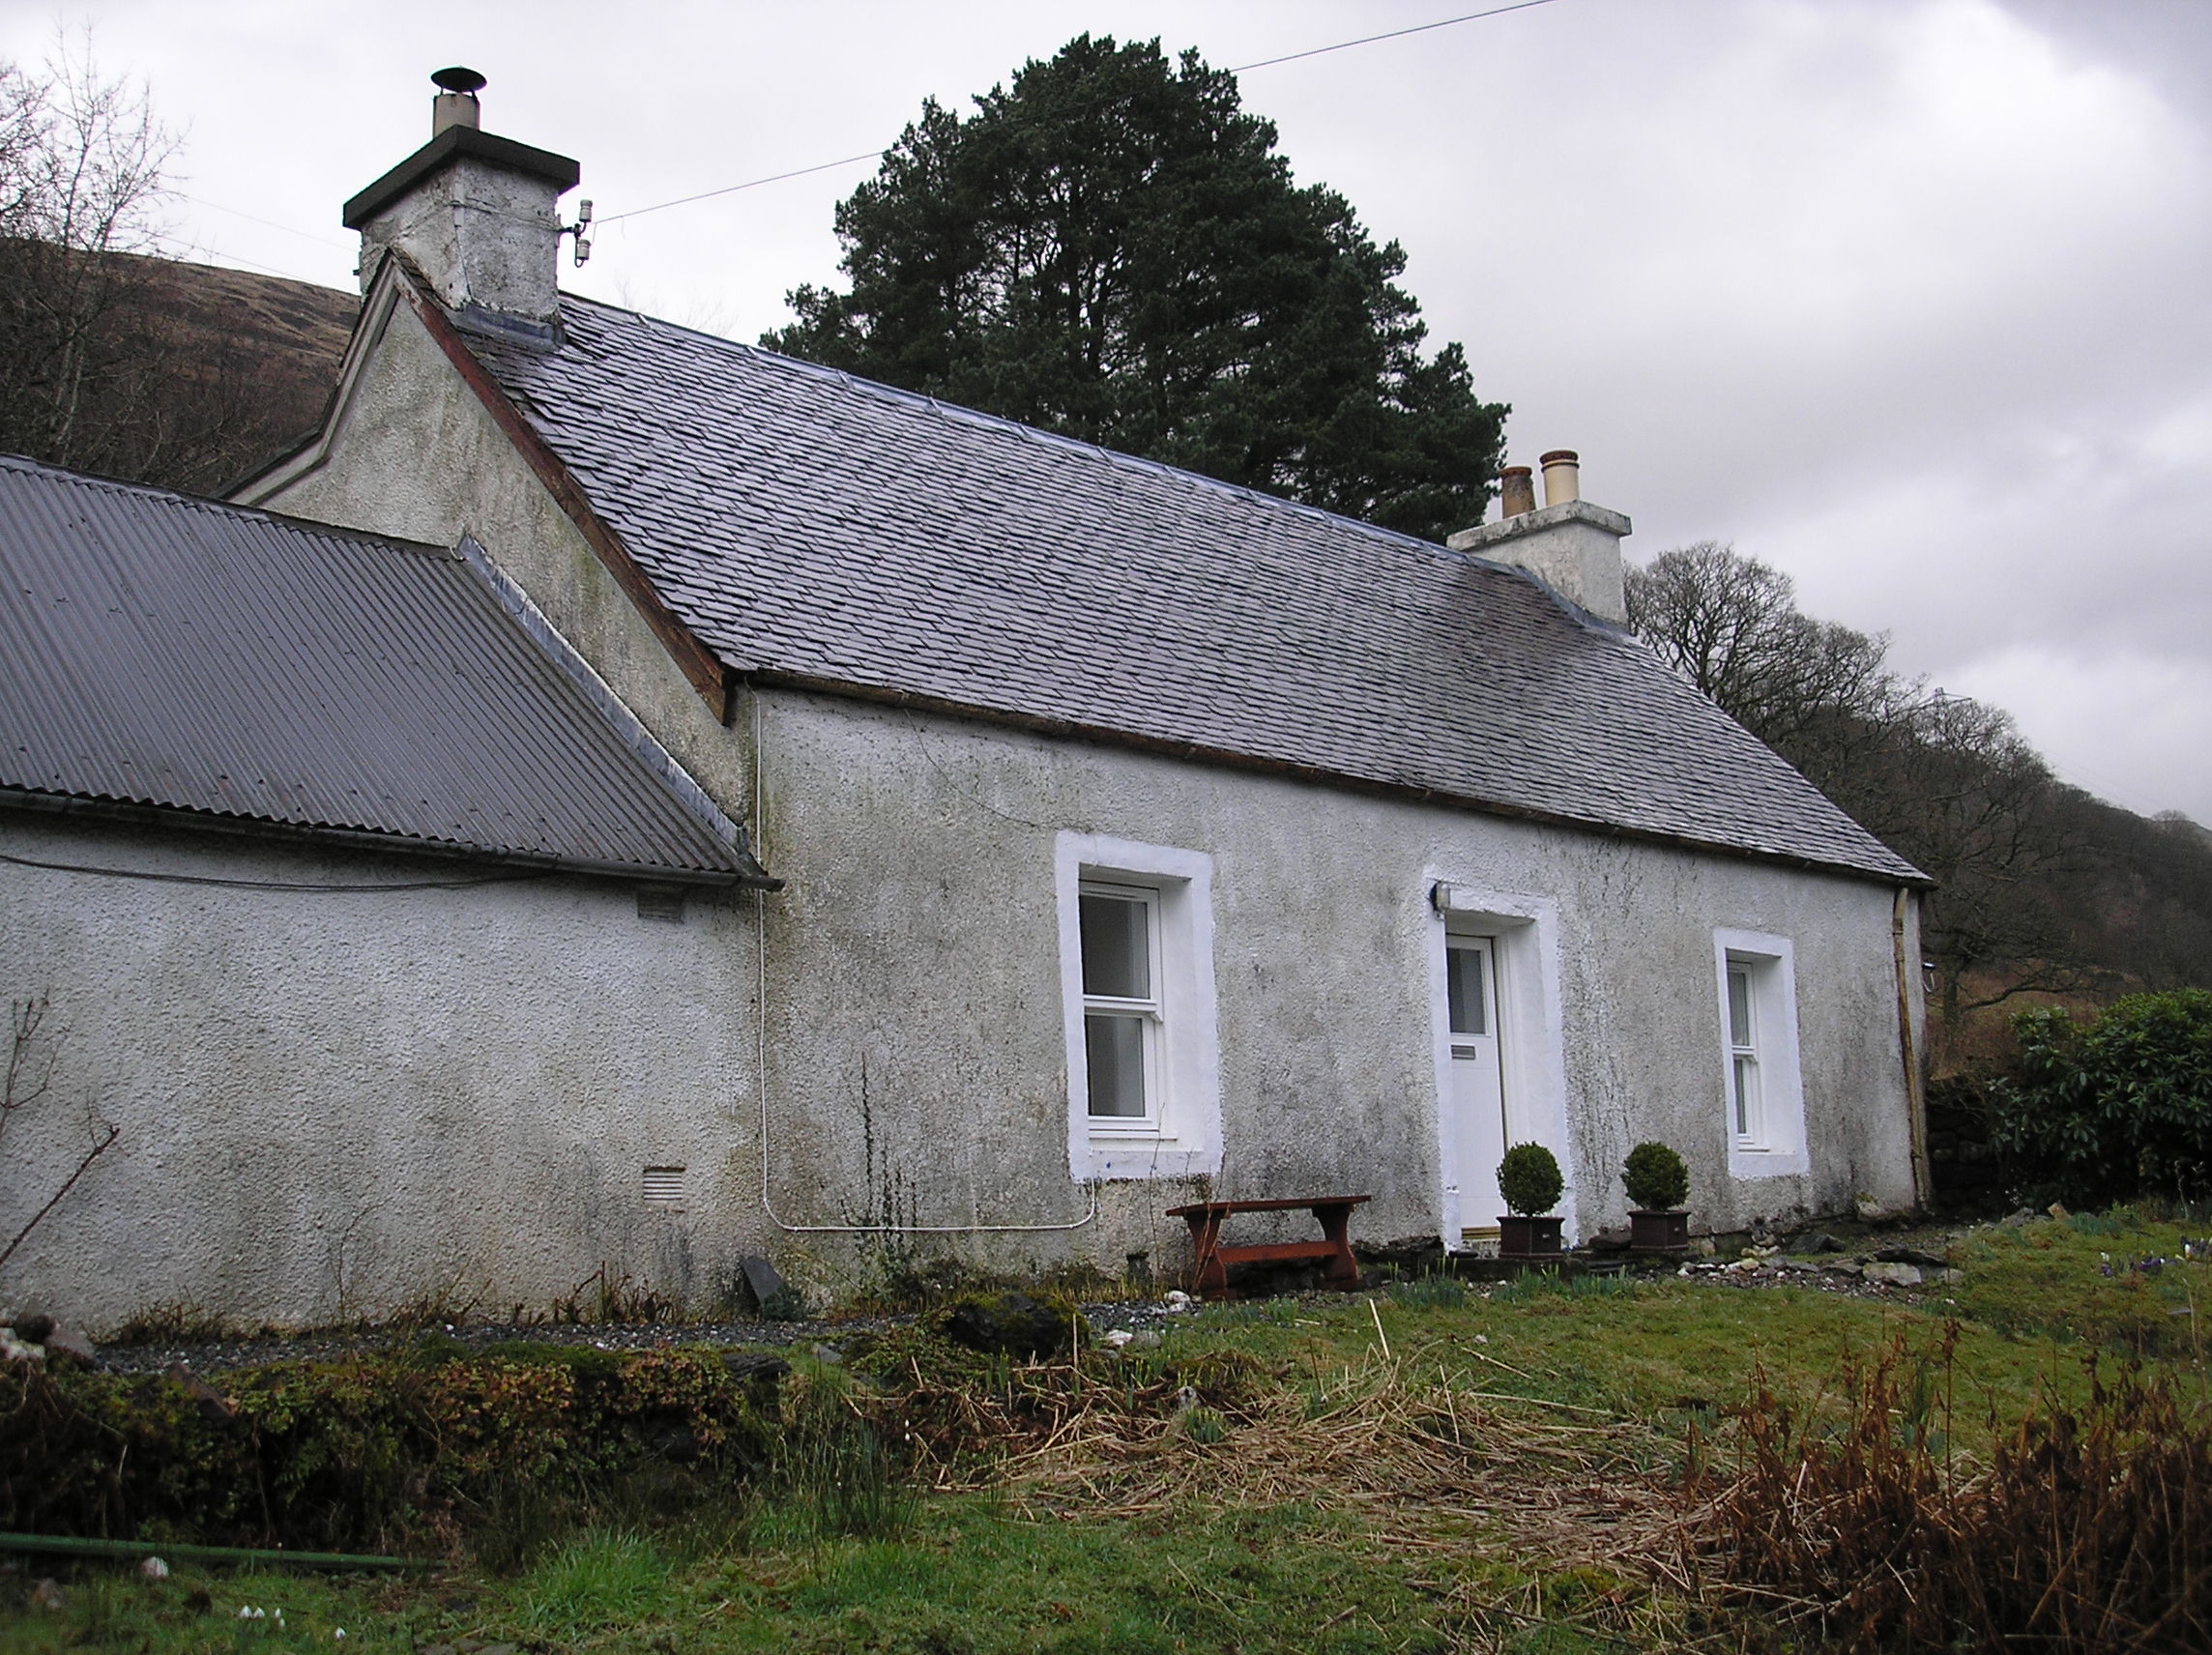 Cuil Cottage